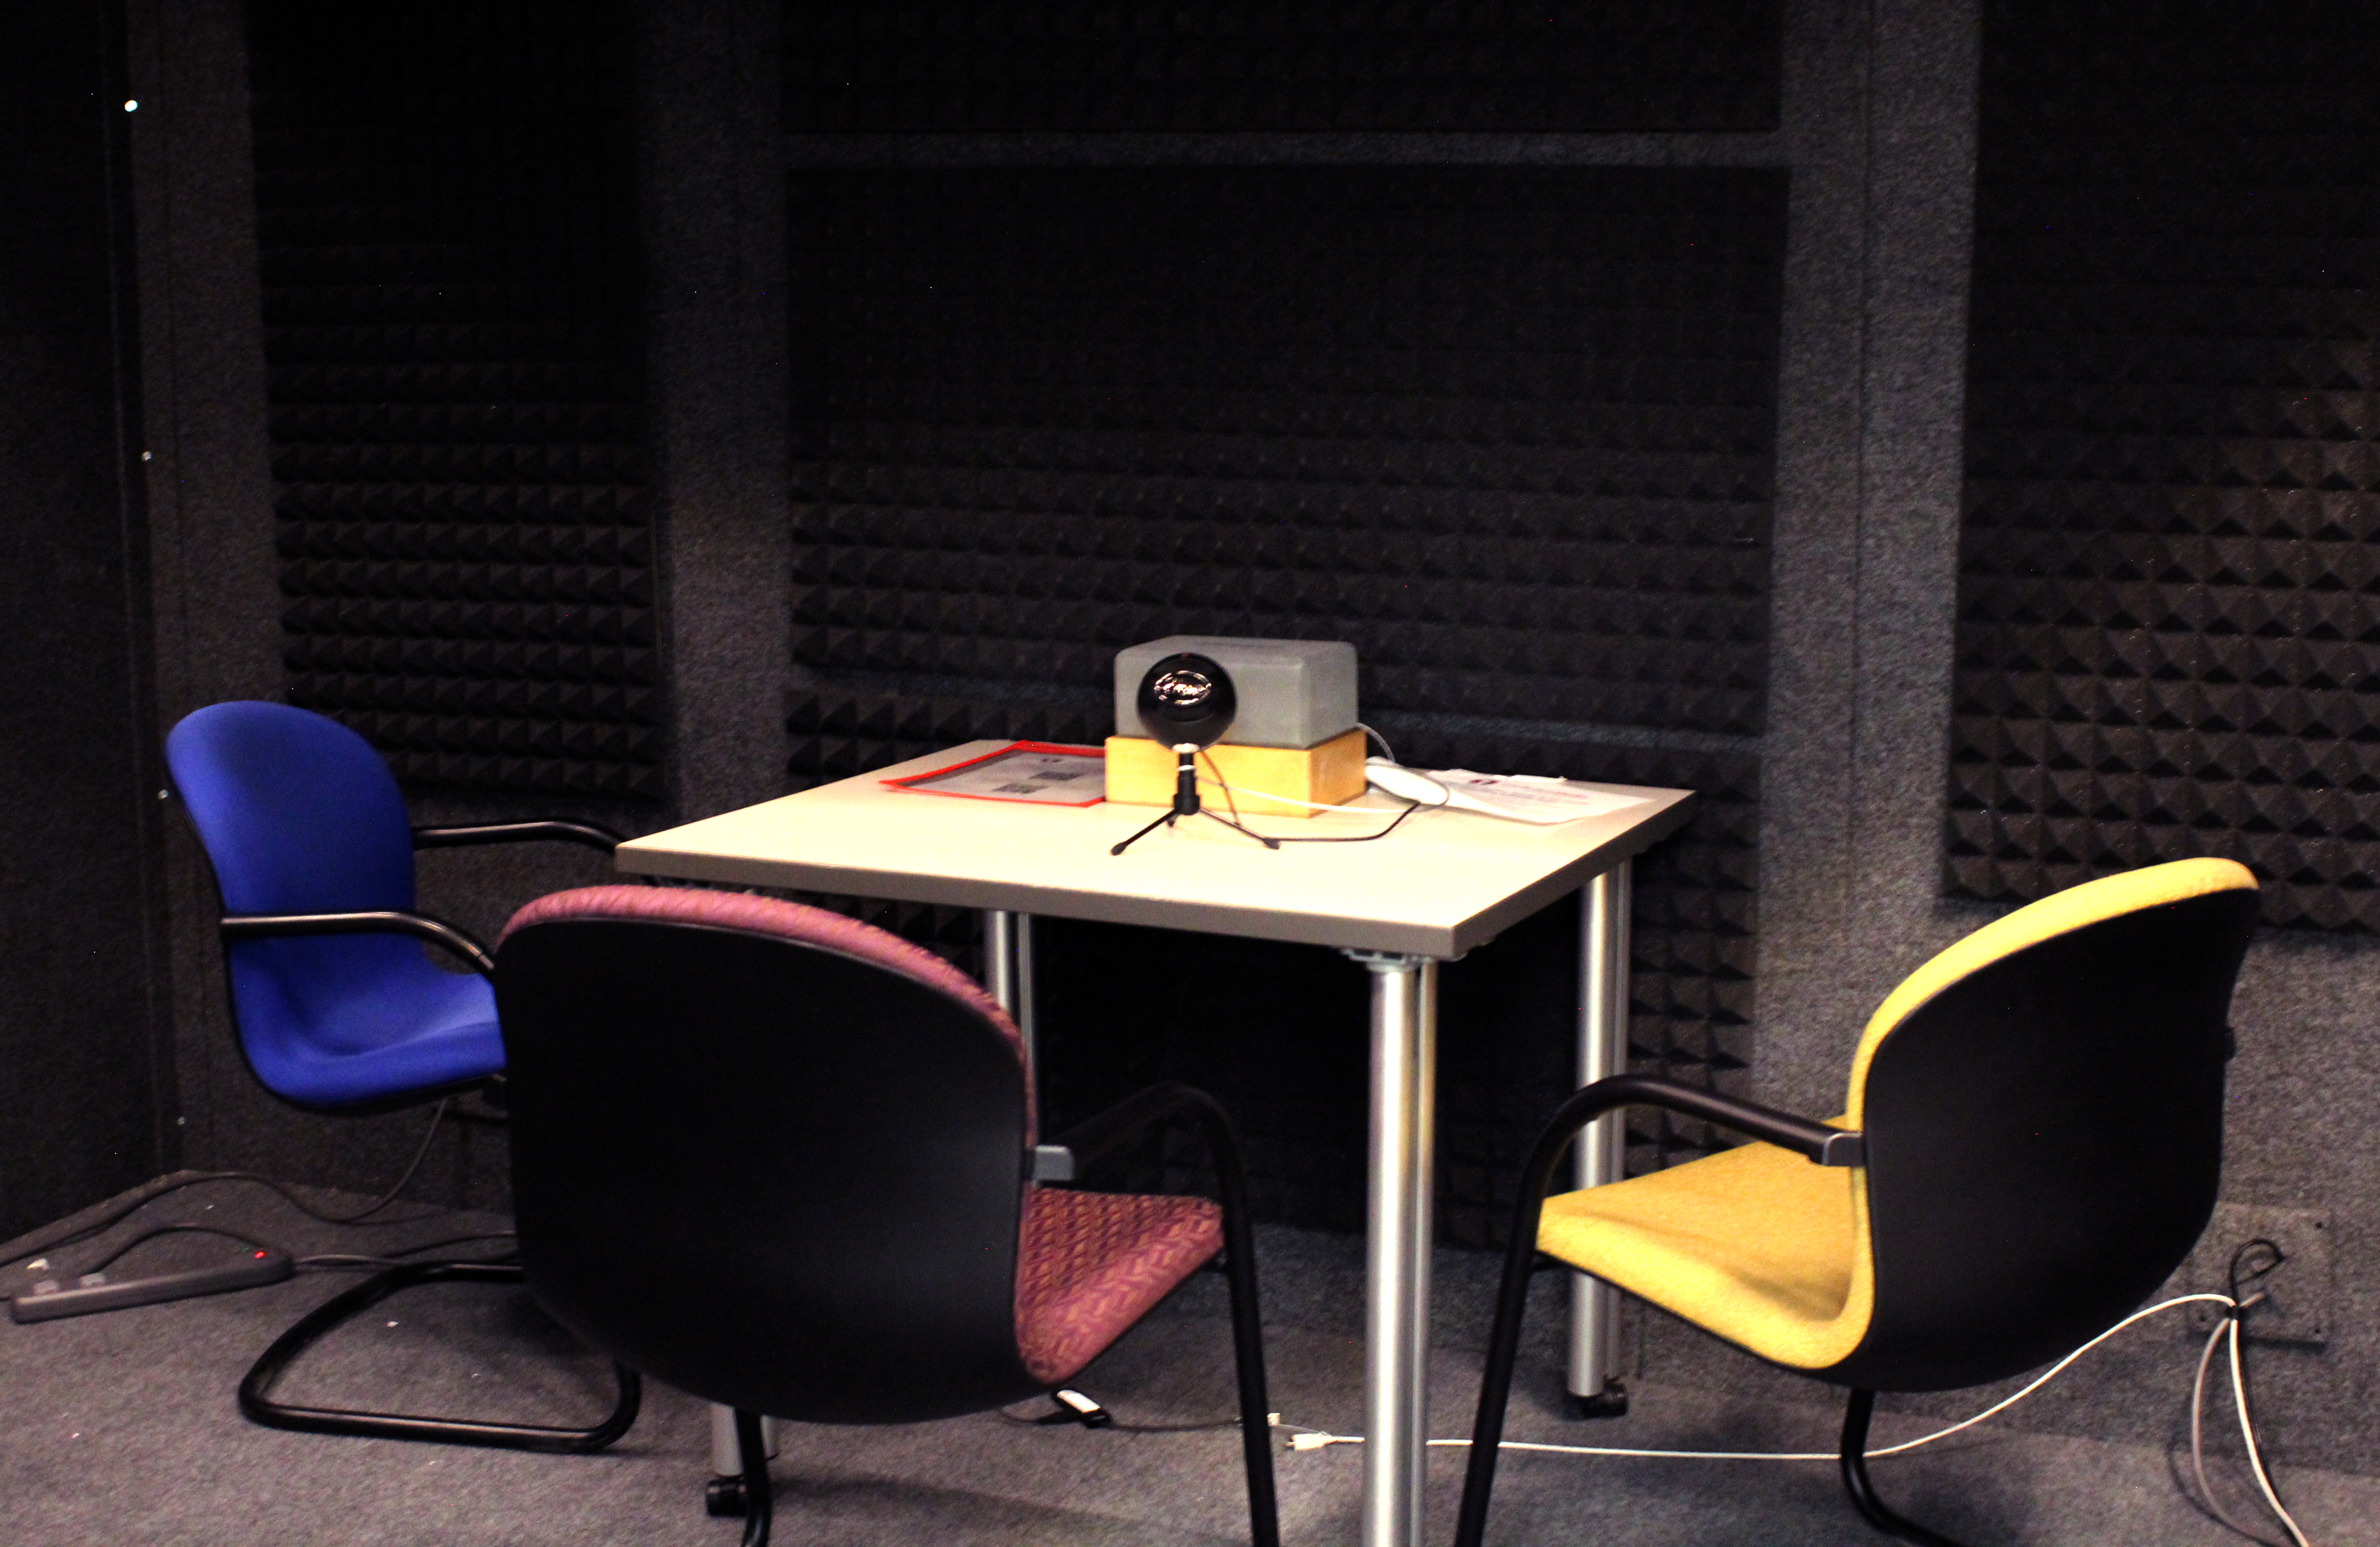 Podcast Booth Interior